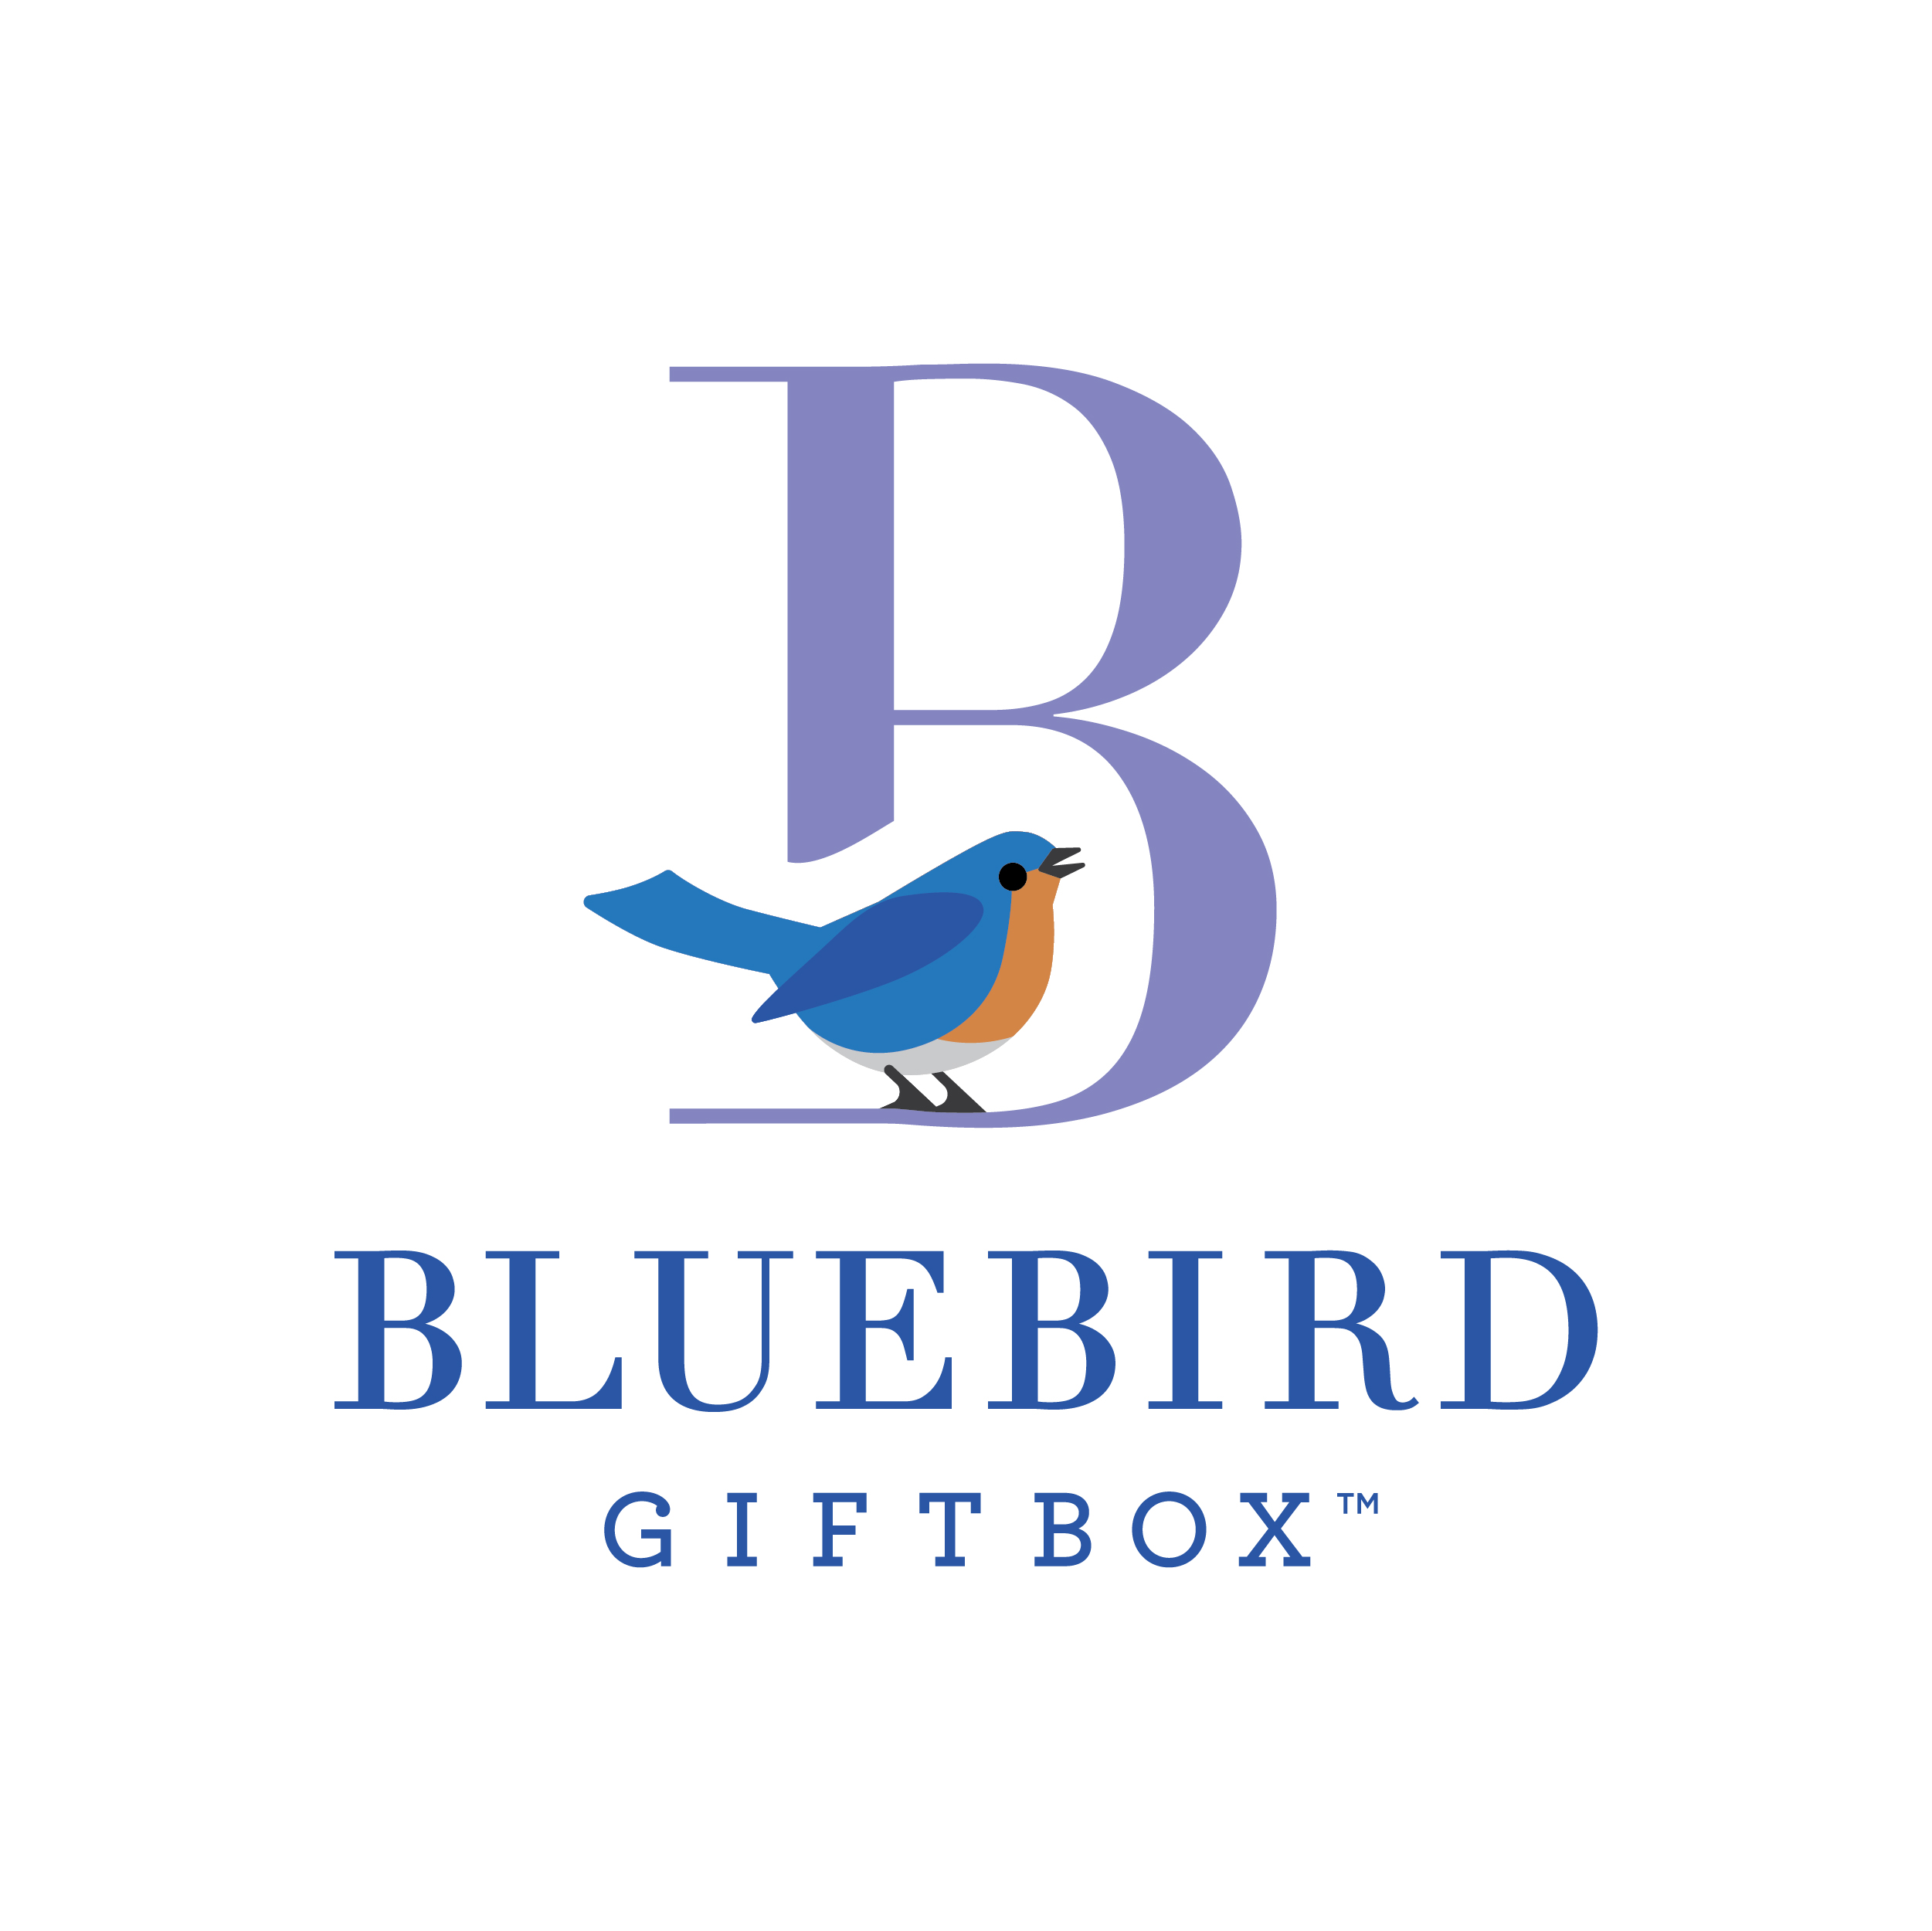 Bluebird Giftbox  logo design by logo designer Roxanne Bradley-Tate Design, LLC for your inspiration and for the worlds largest logo competition